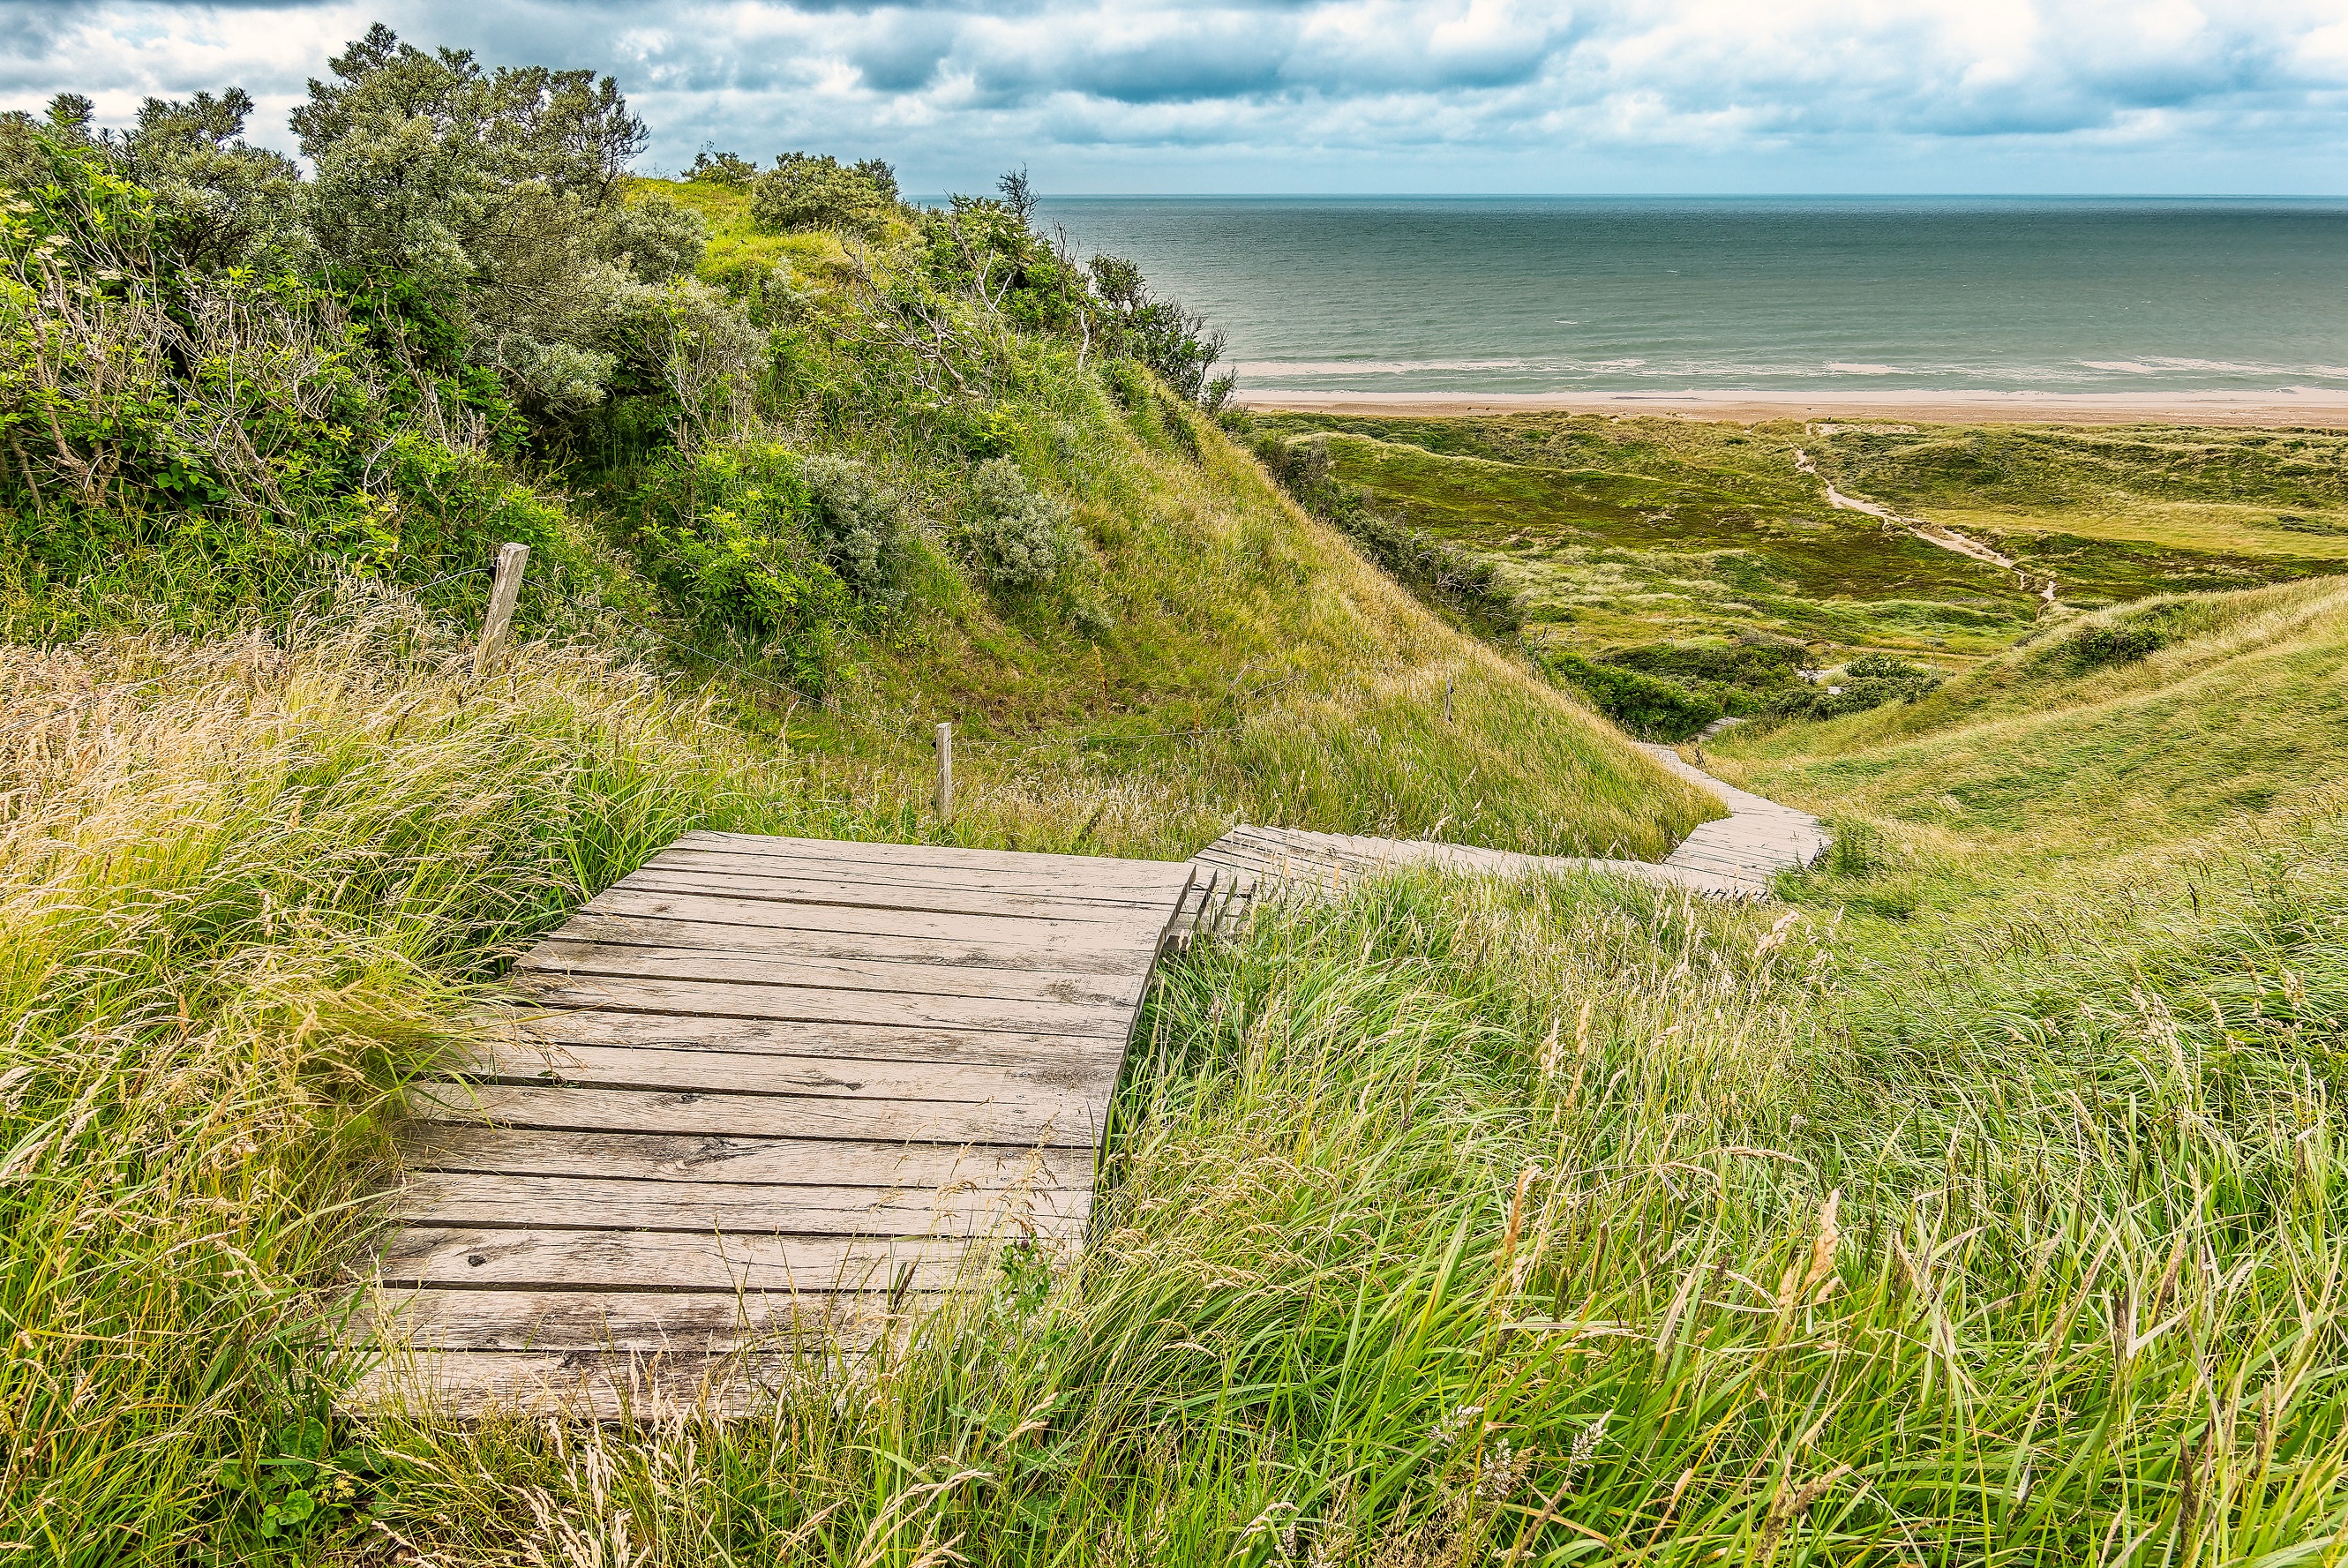 Hills and slopes at Svinkloes beach in Thy in Denmark